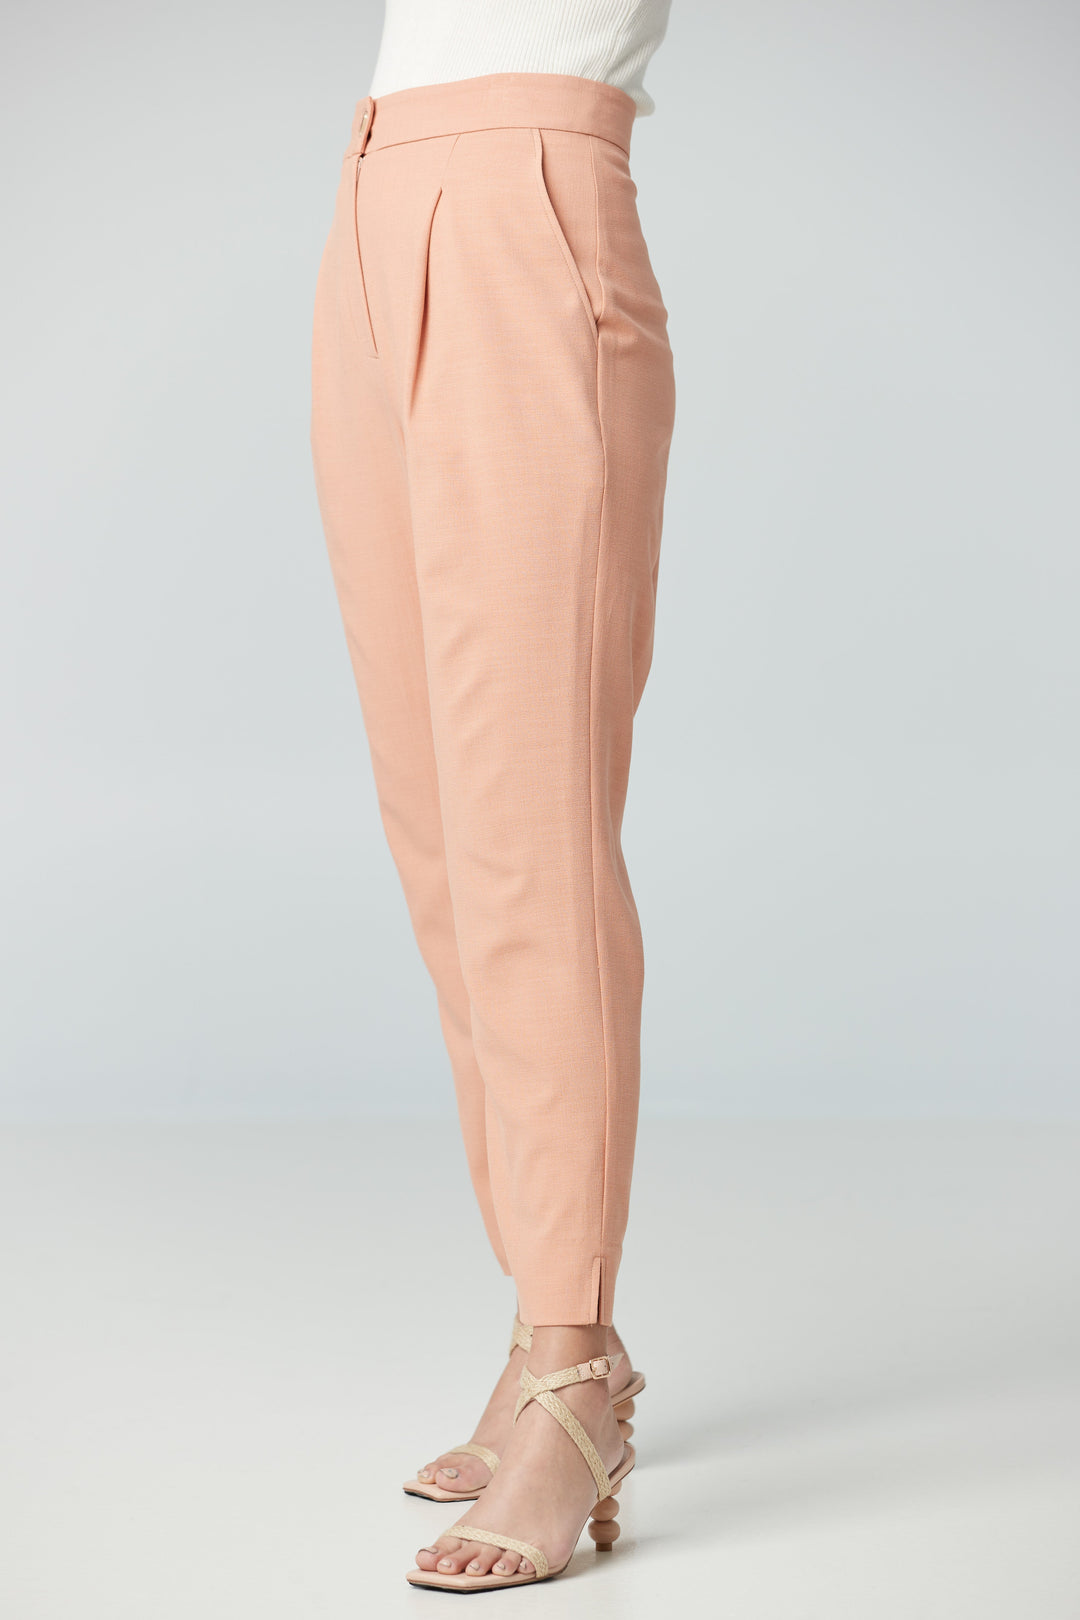 Crop pant with front pleat